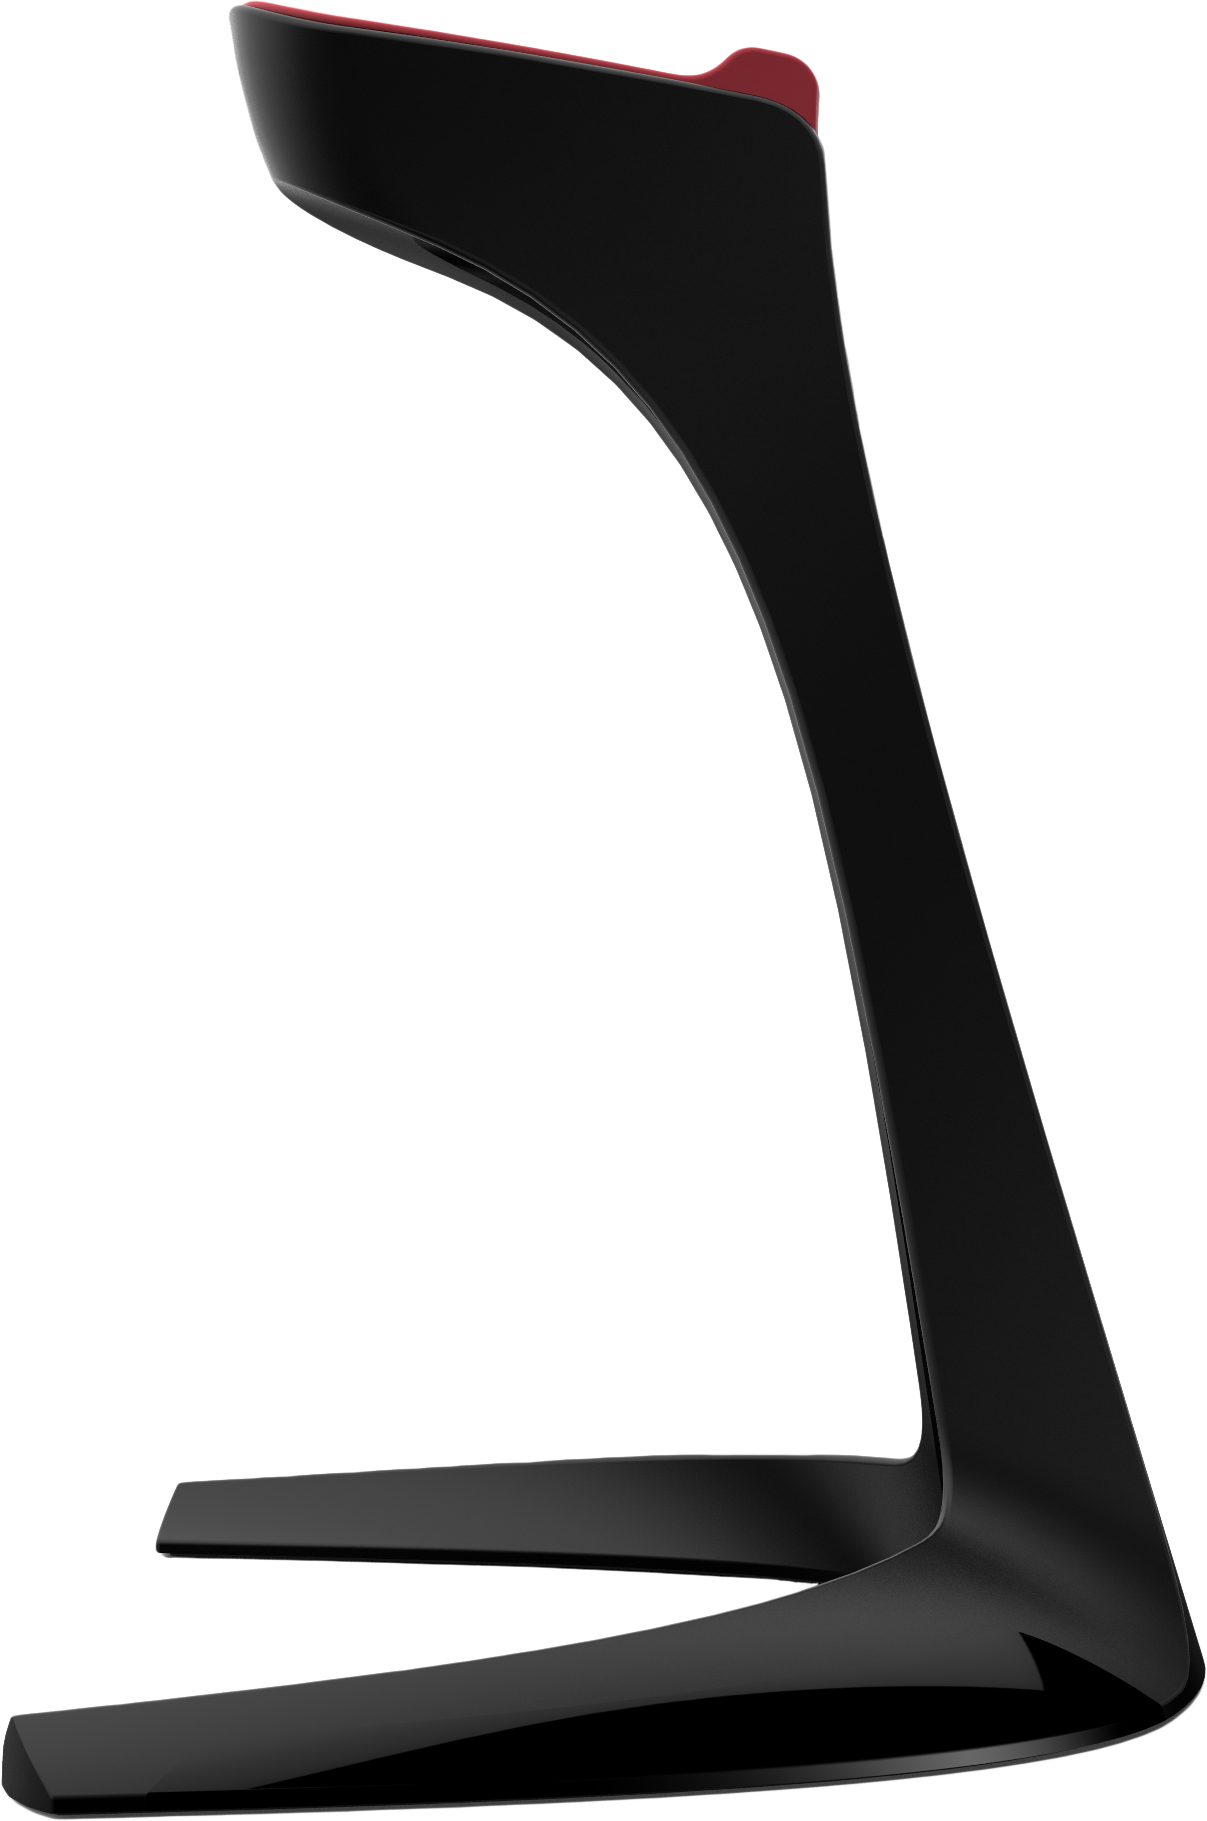 EXCEDO Gaming Headset Stand, black